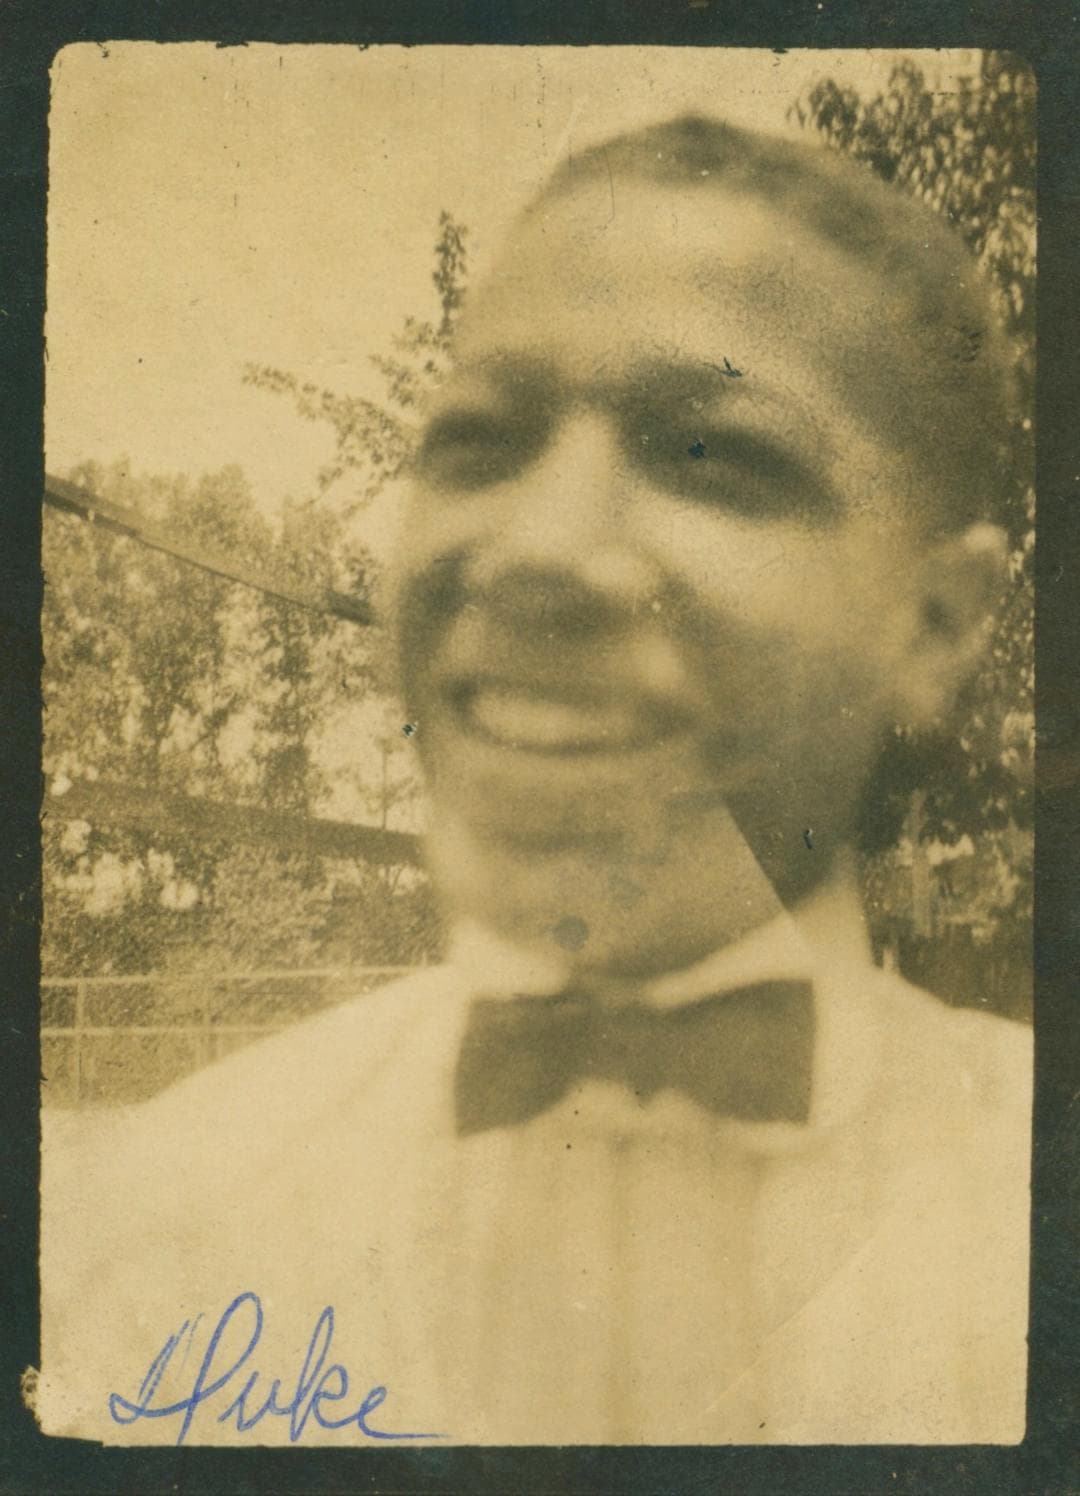 Duke Ellington's picture from his family